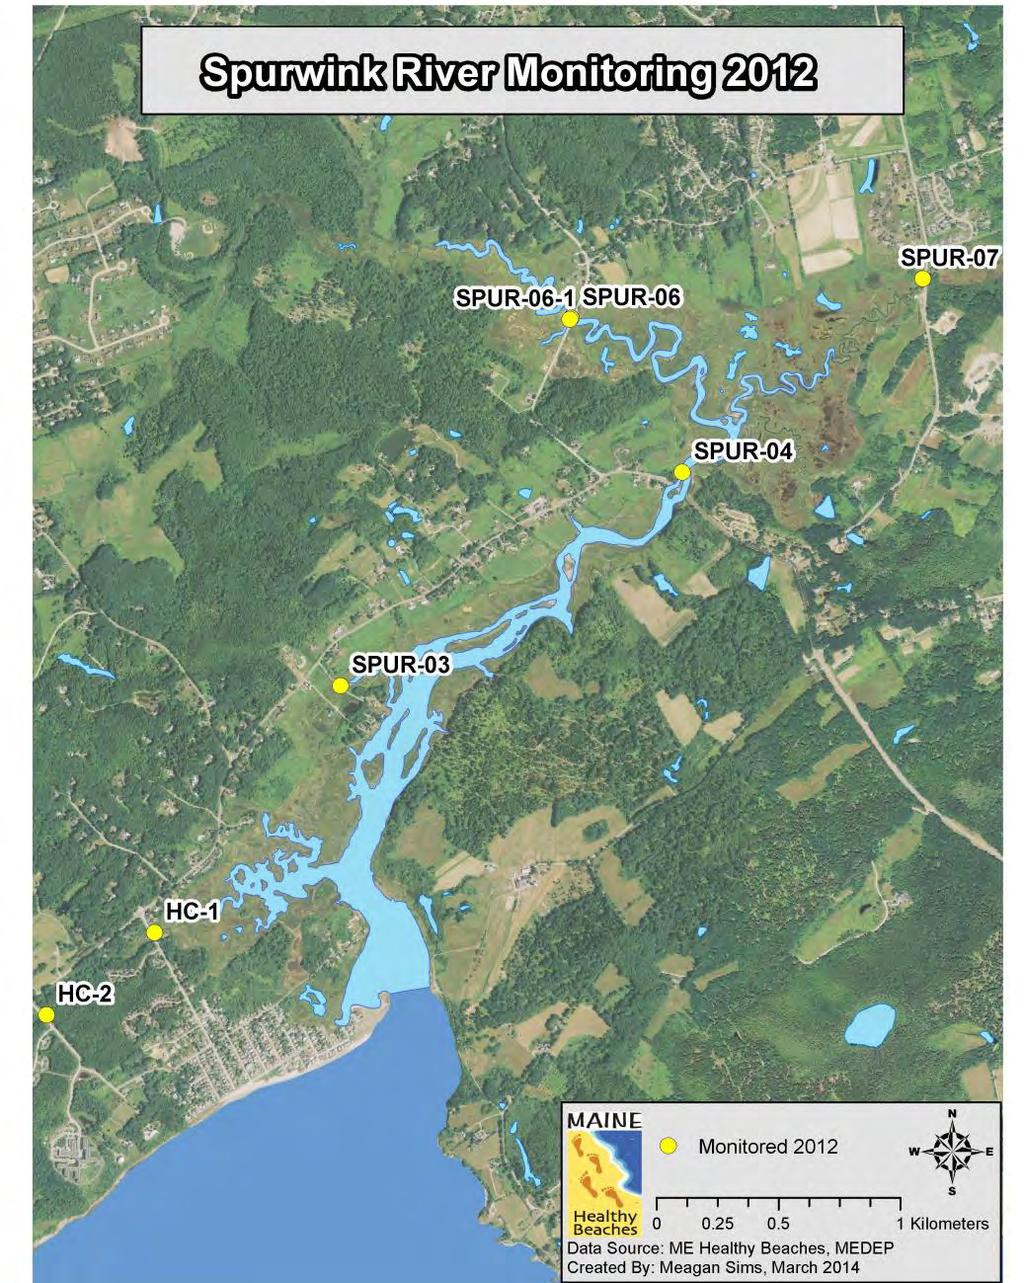 212 Enhanced Monitoring In 212, 21 Enterococci and optical brightener samples were analyzed at 7 sites in the Spurwink River watershed keeping in mind ease of accessibility and avoidance of private